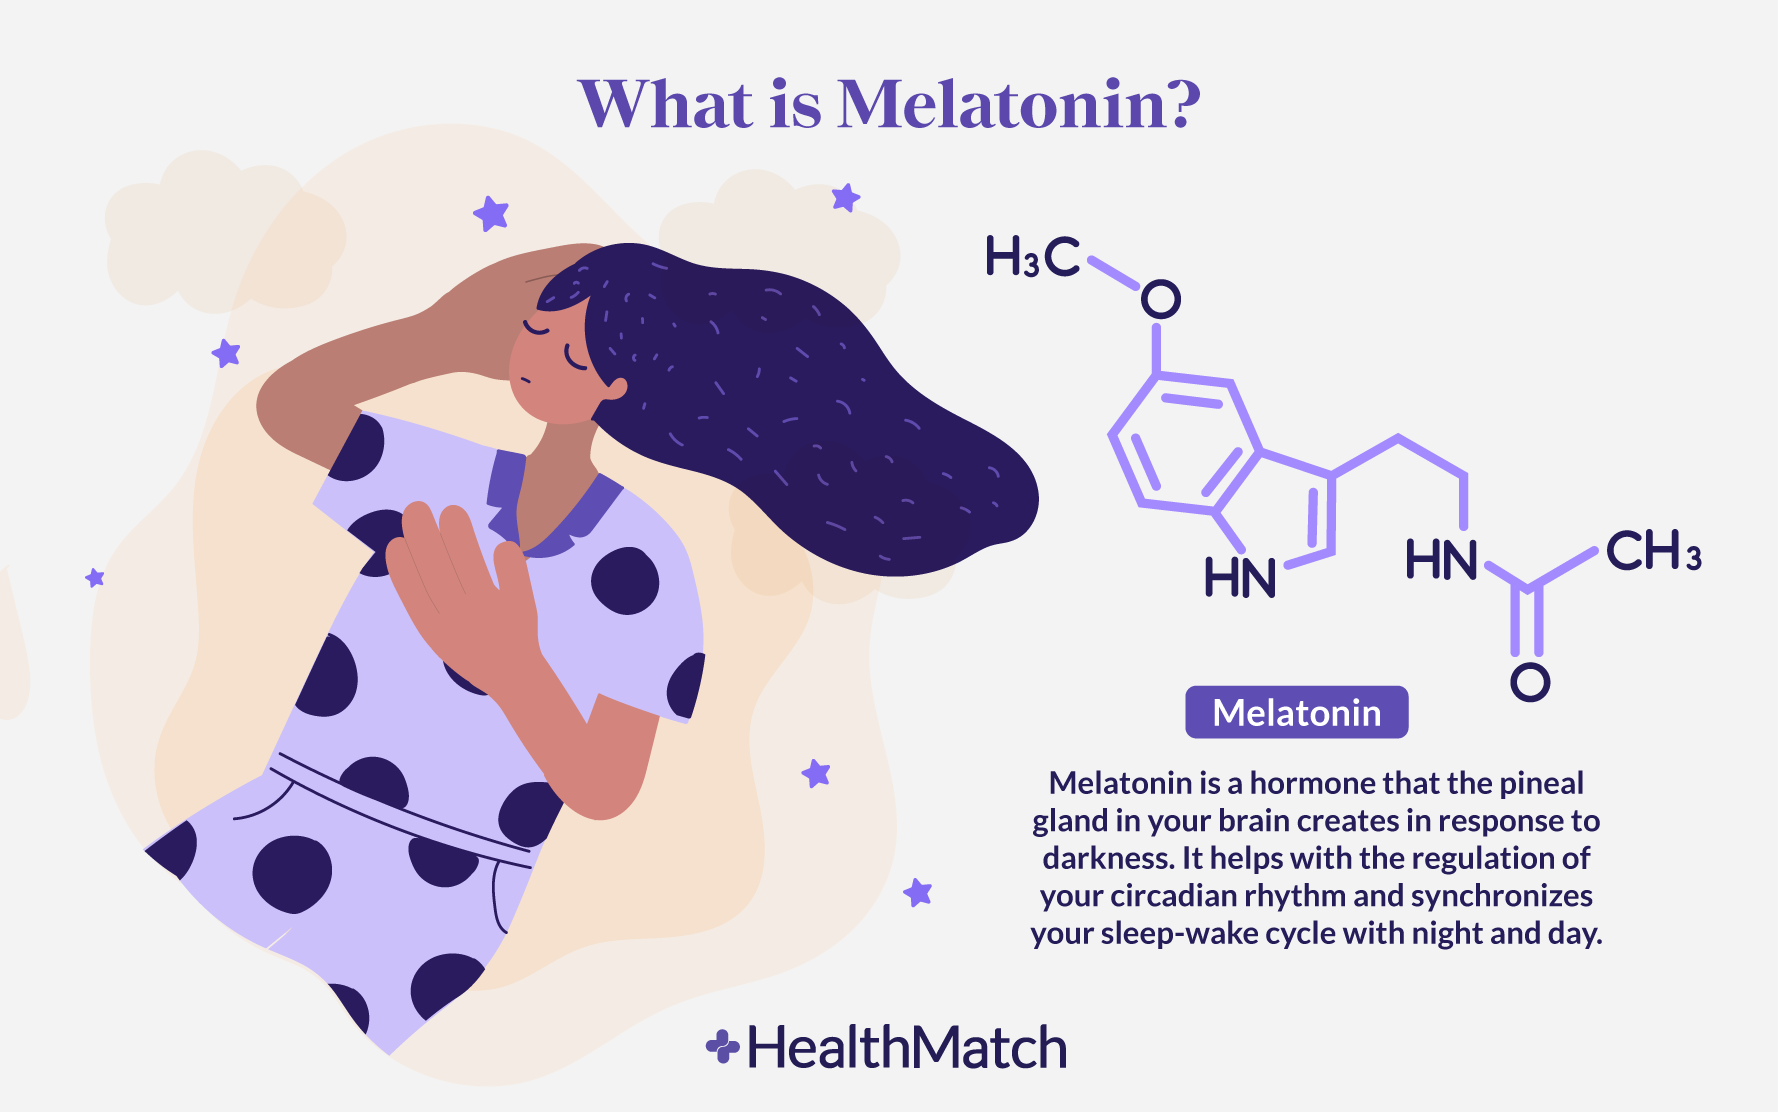 HealthMatch More People Are Turning To Melatonin For Sleep, But Is It